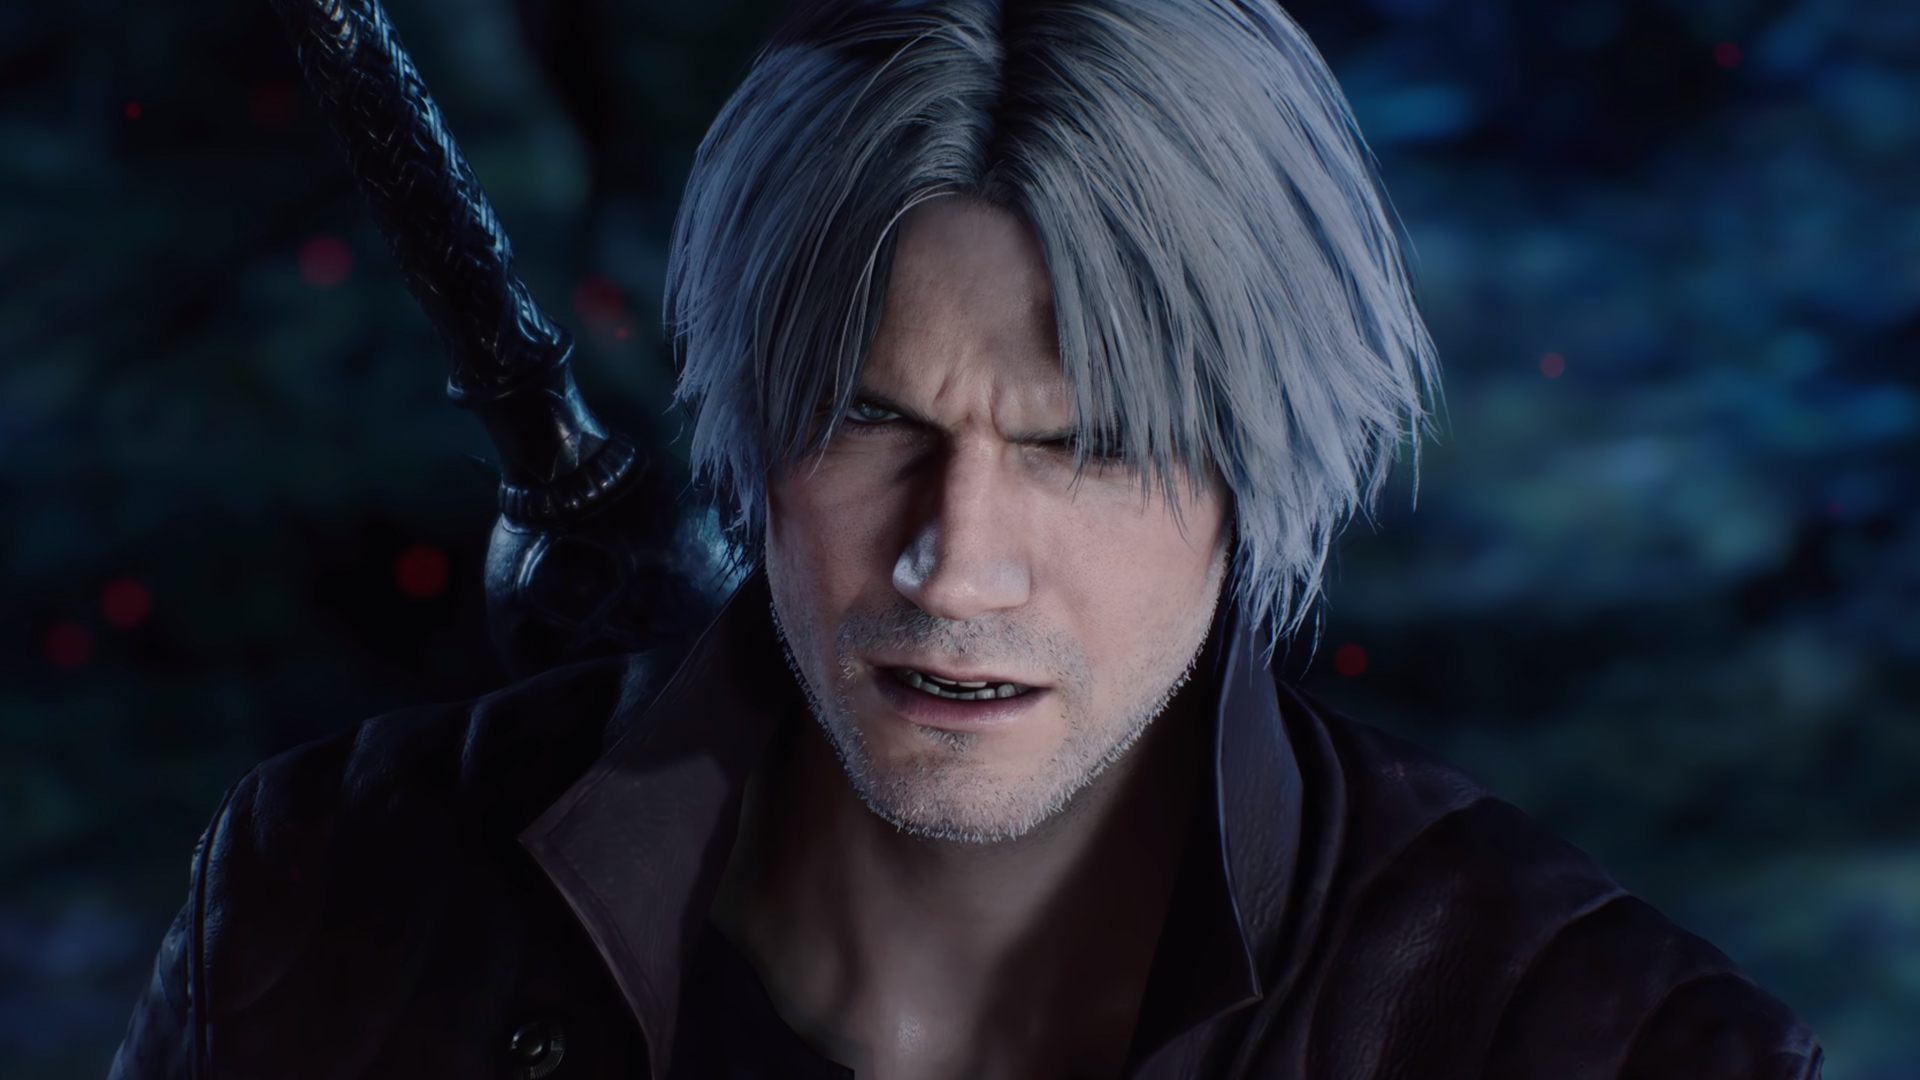 Carjacking Attempt Leaves Devil May Cry Voice Actor Unharmed Despite